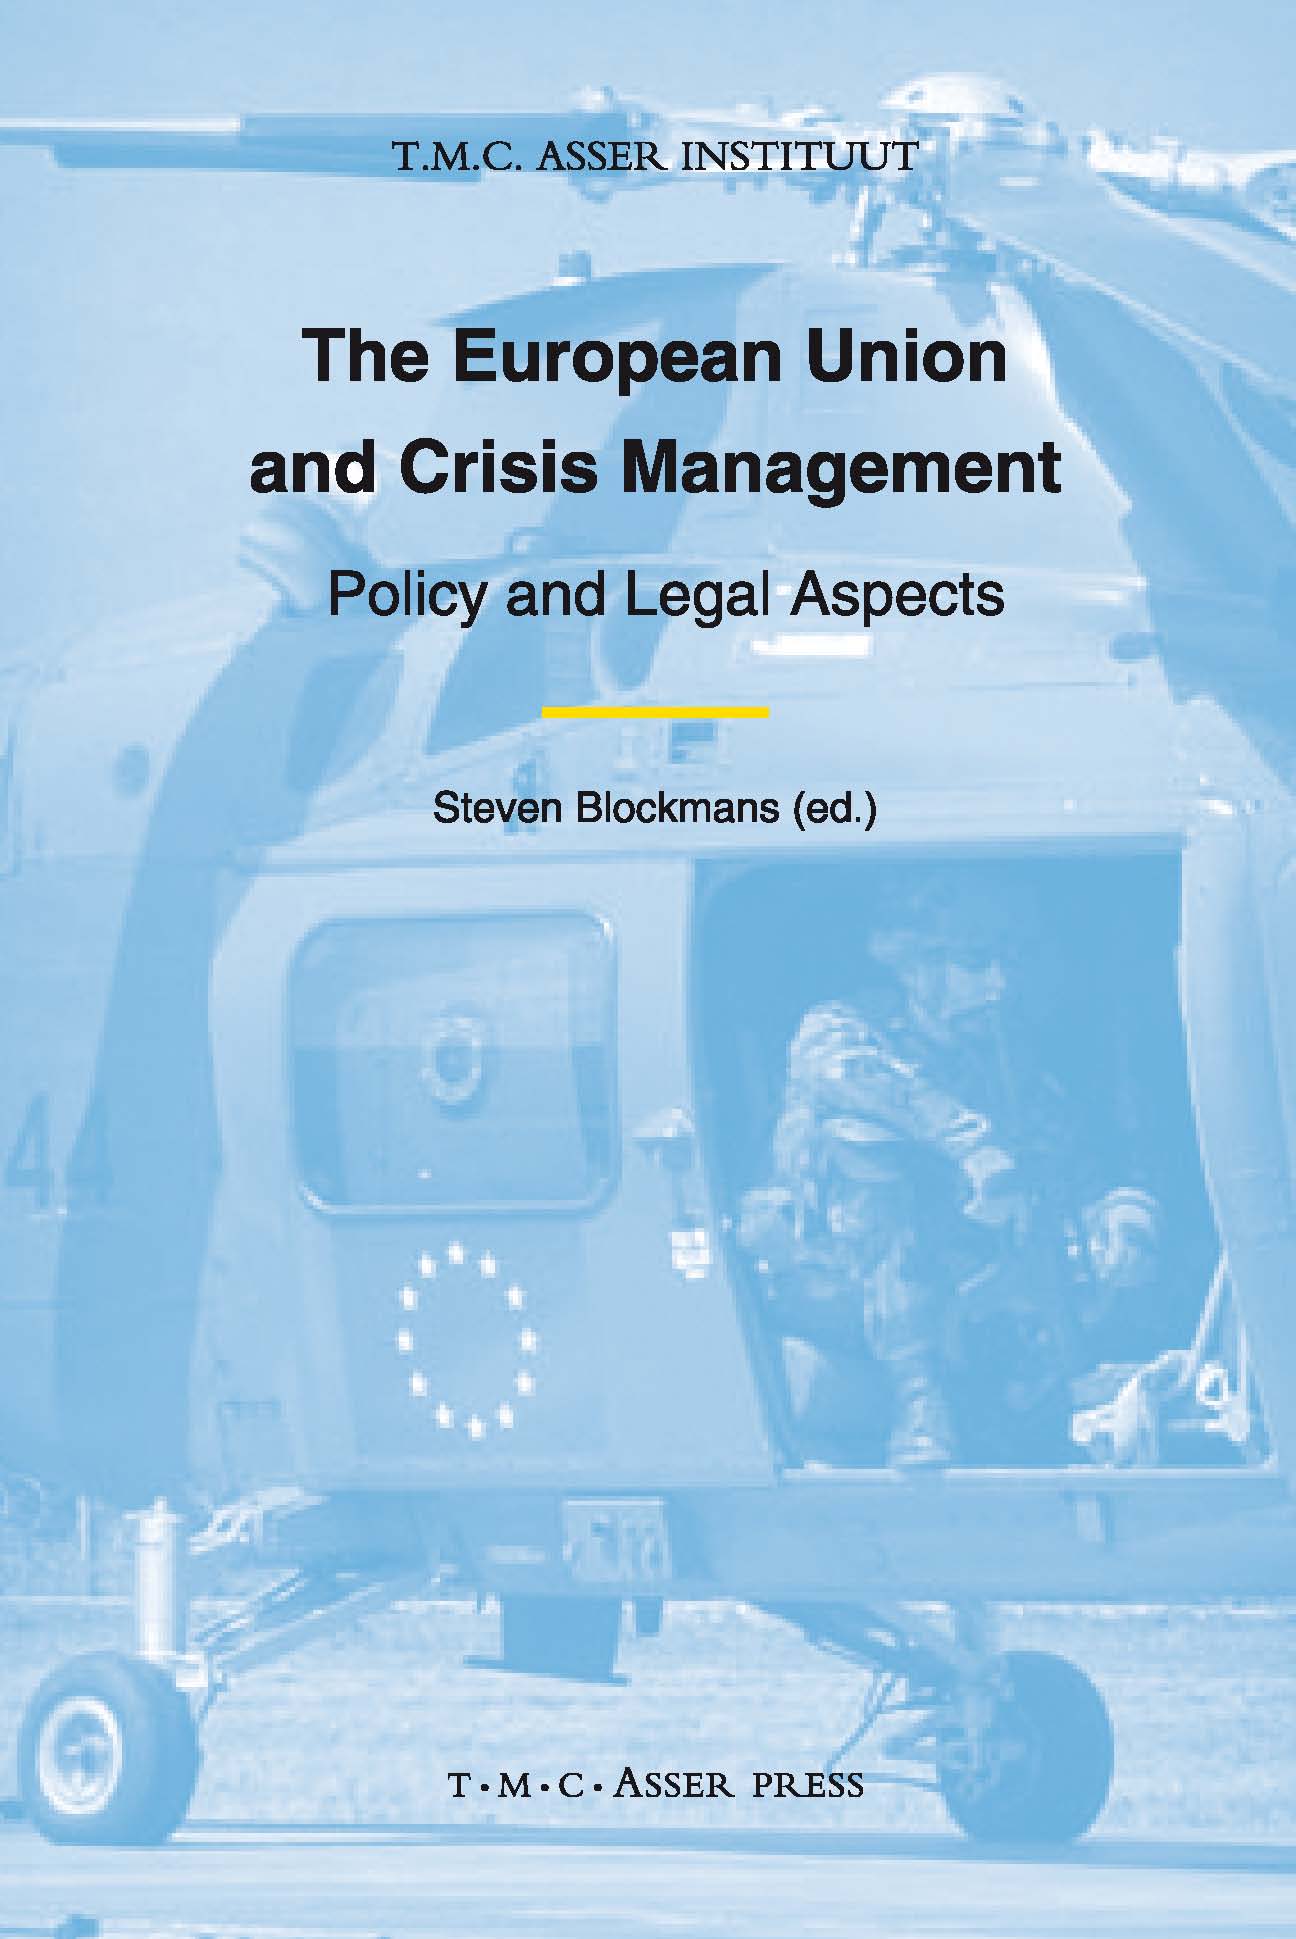 The European Union and Crisis Management - Policy and Legal Aspects